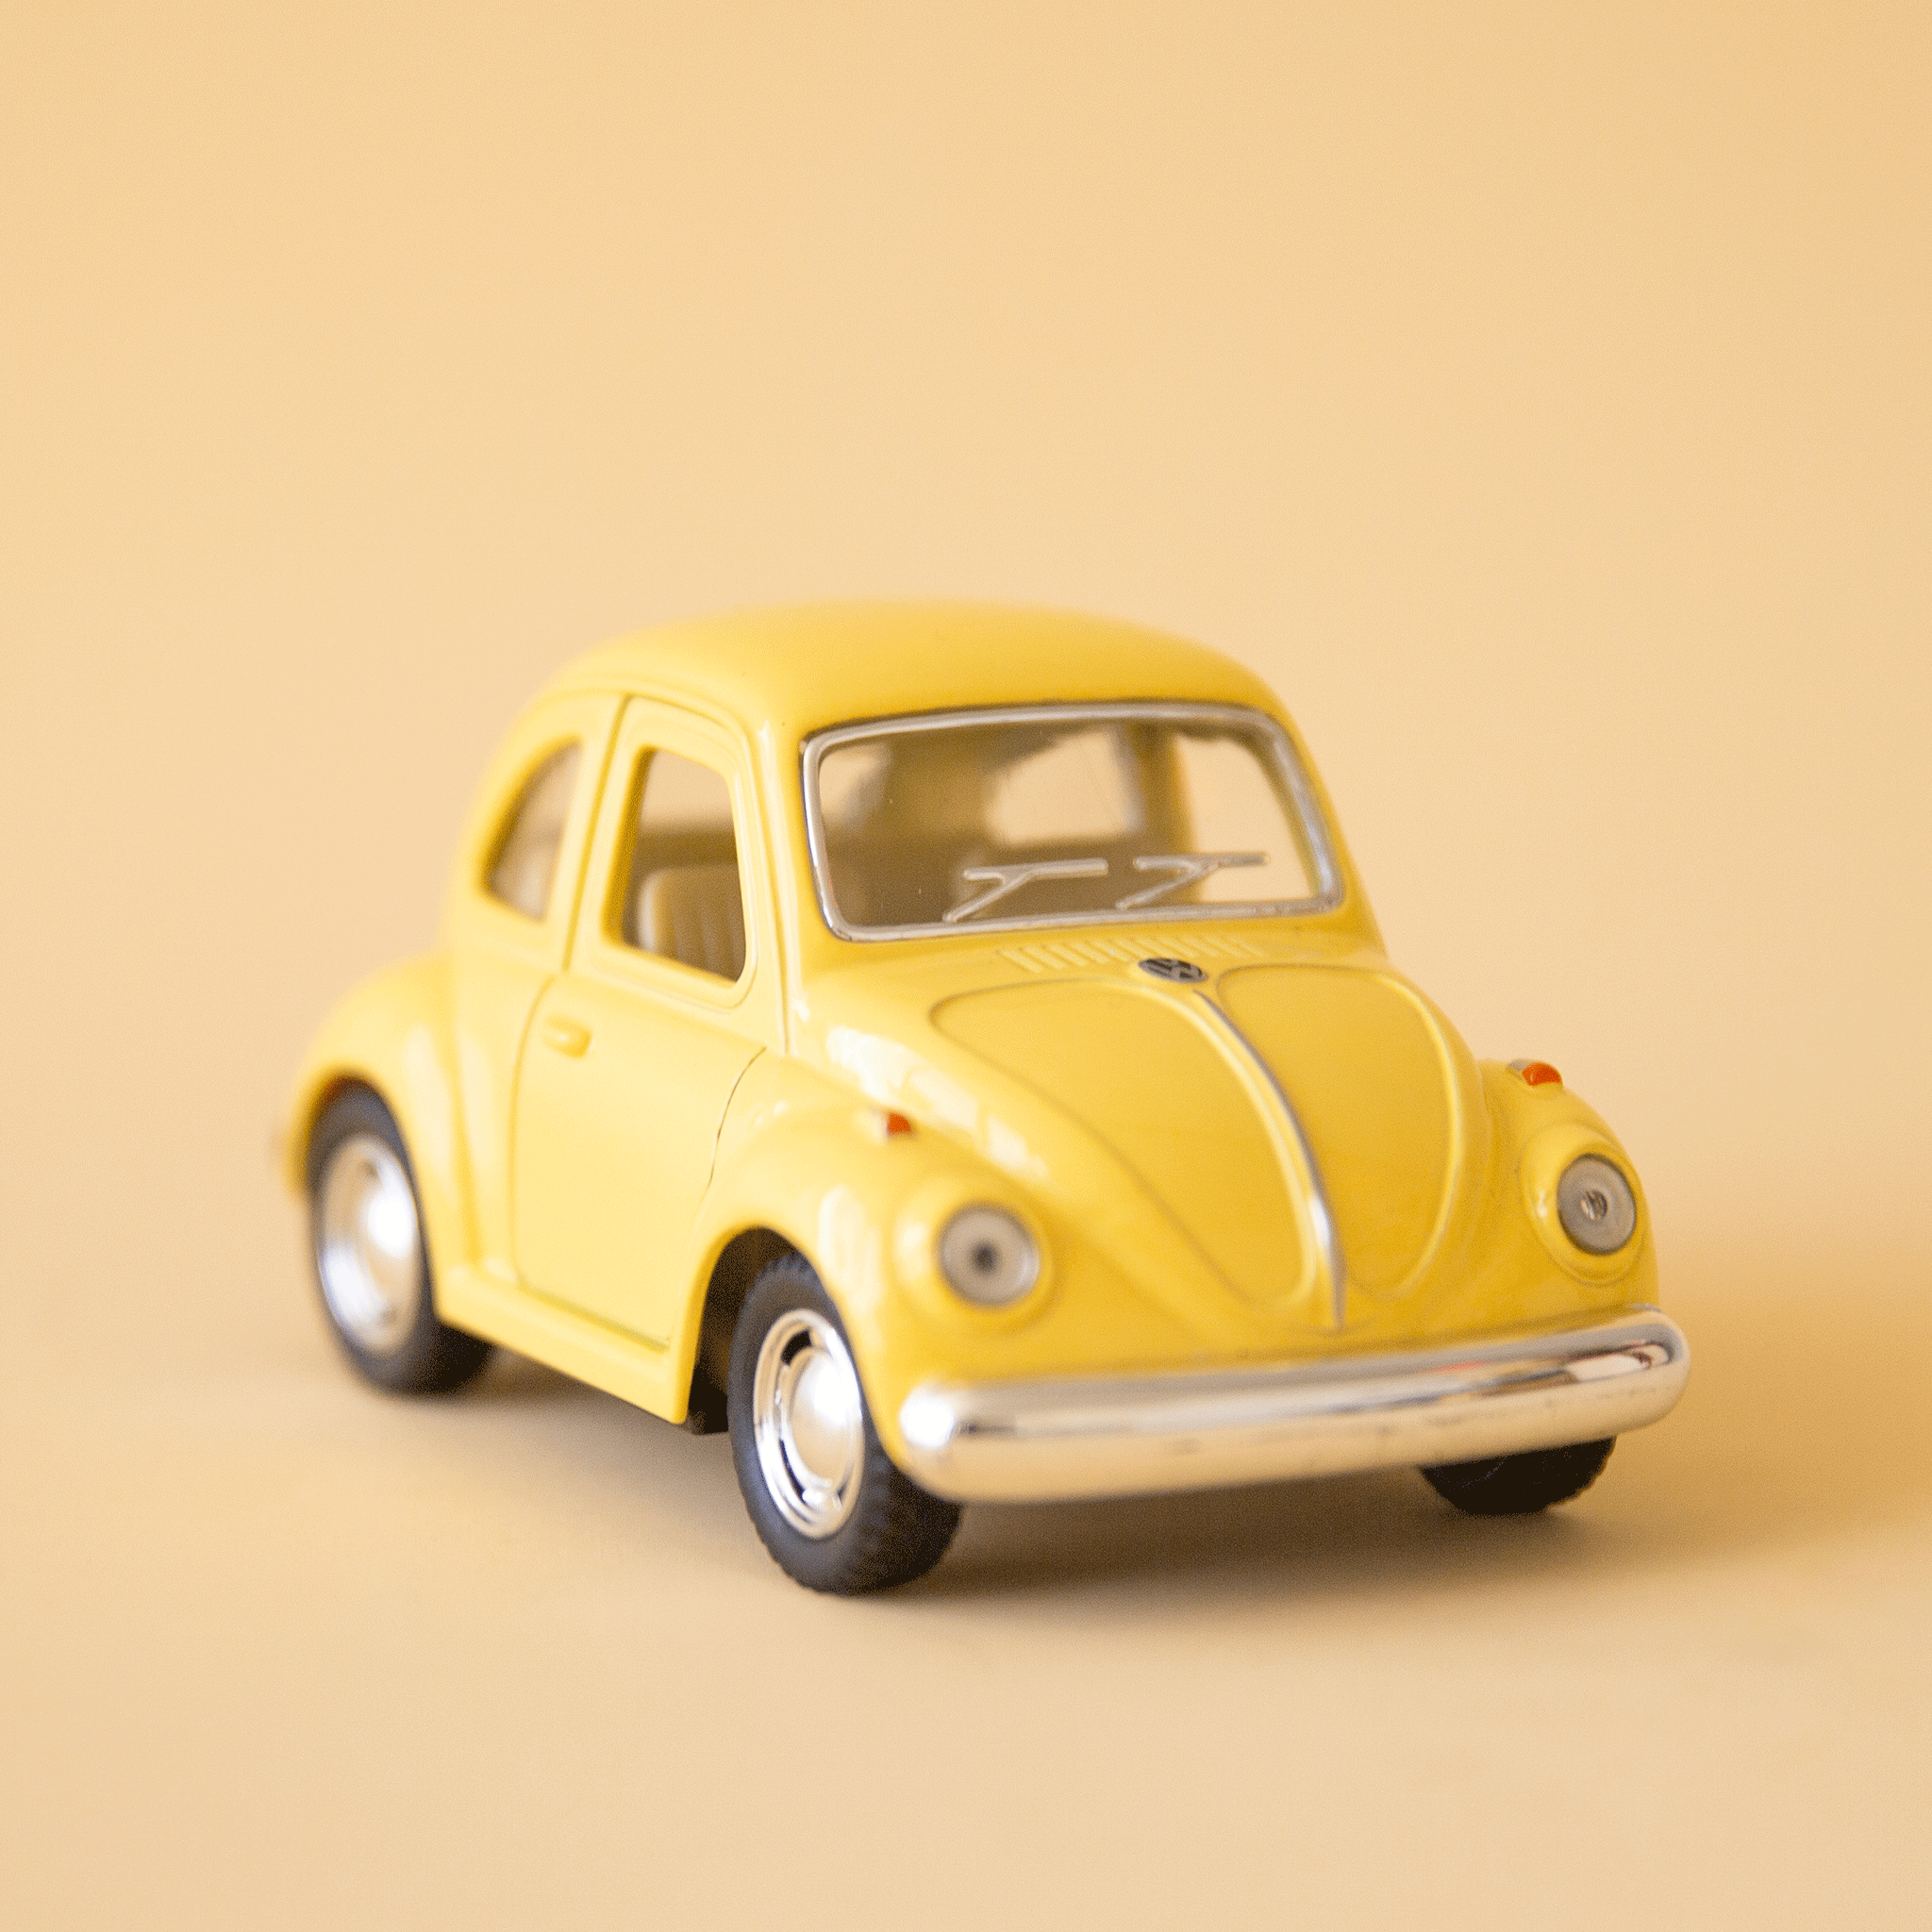 On a yellow background is a yellow vw beetle toy car. 